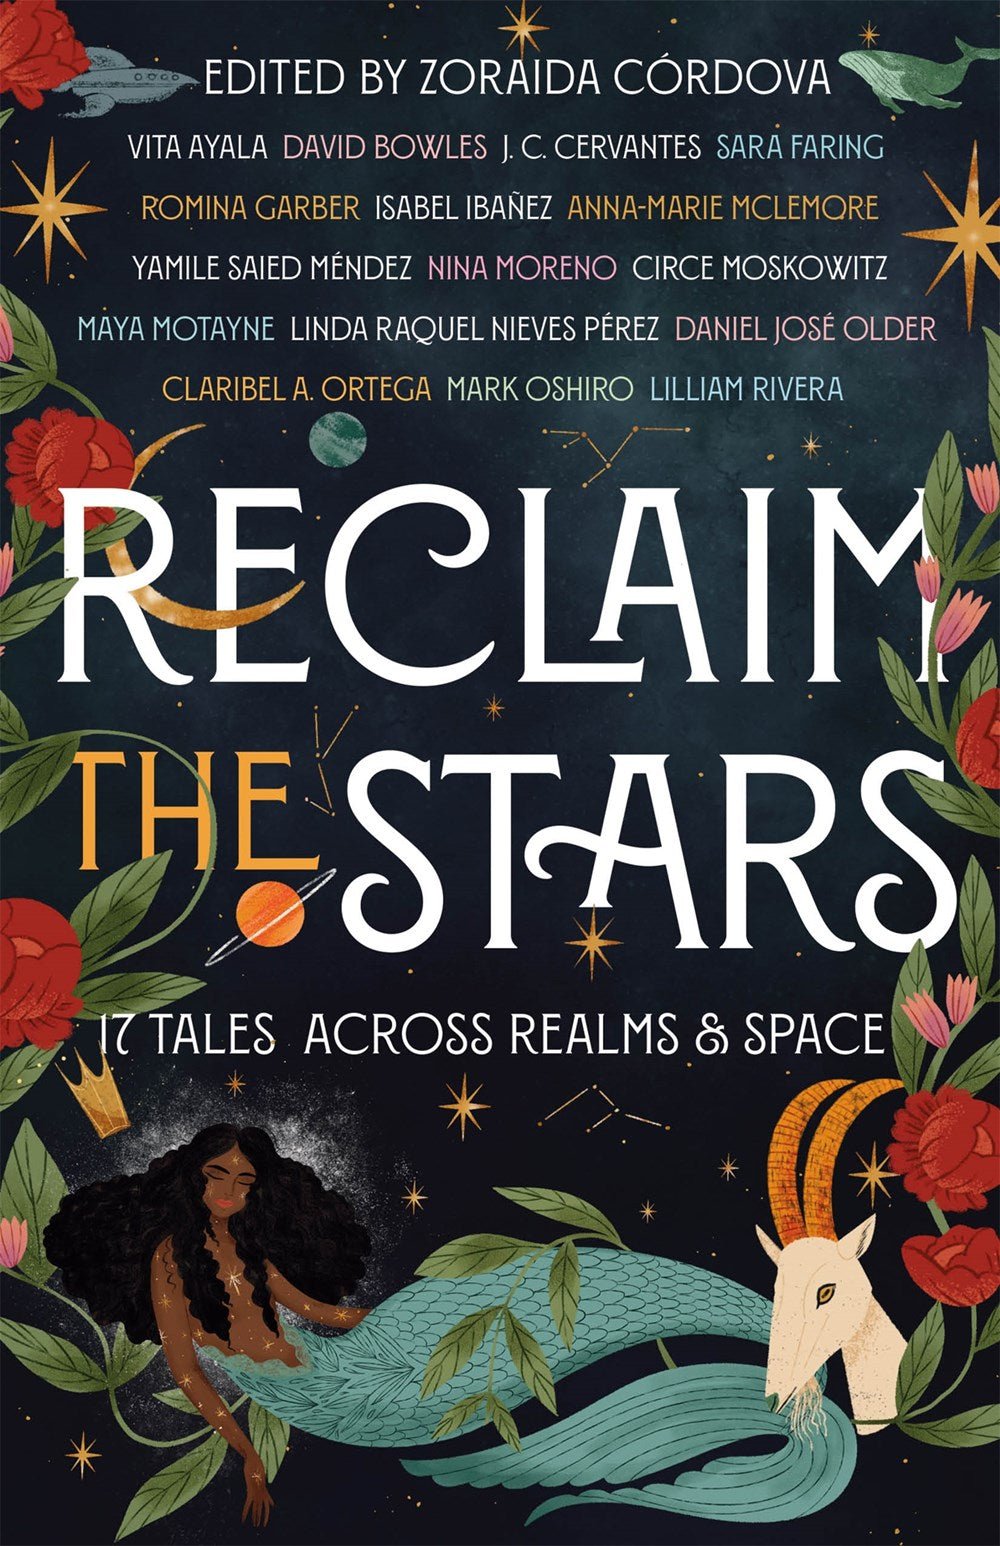 Reclaim the Stars : 17 Tales Across Realms & Space | Latine/LatinX Fantasy Short Stories - Paperbacks & Frybread Co.